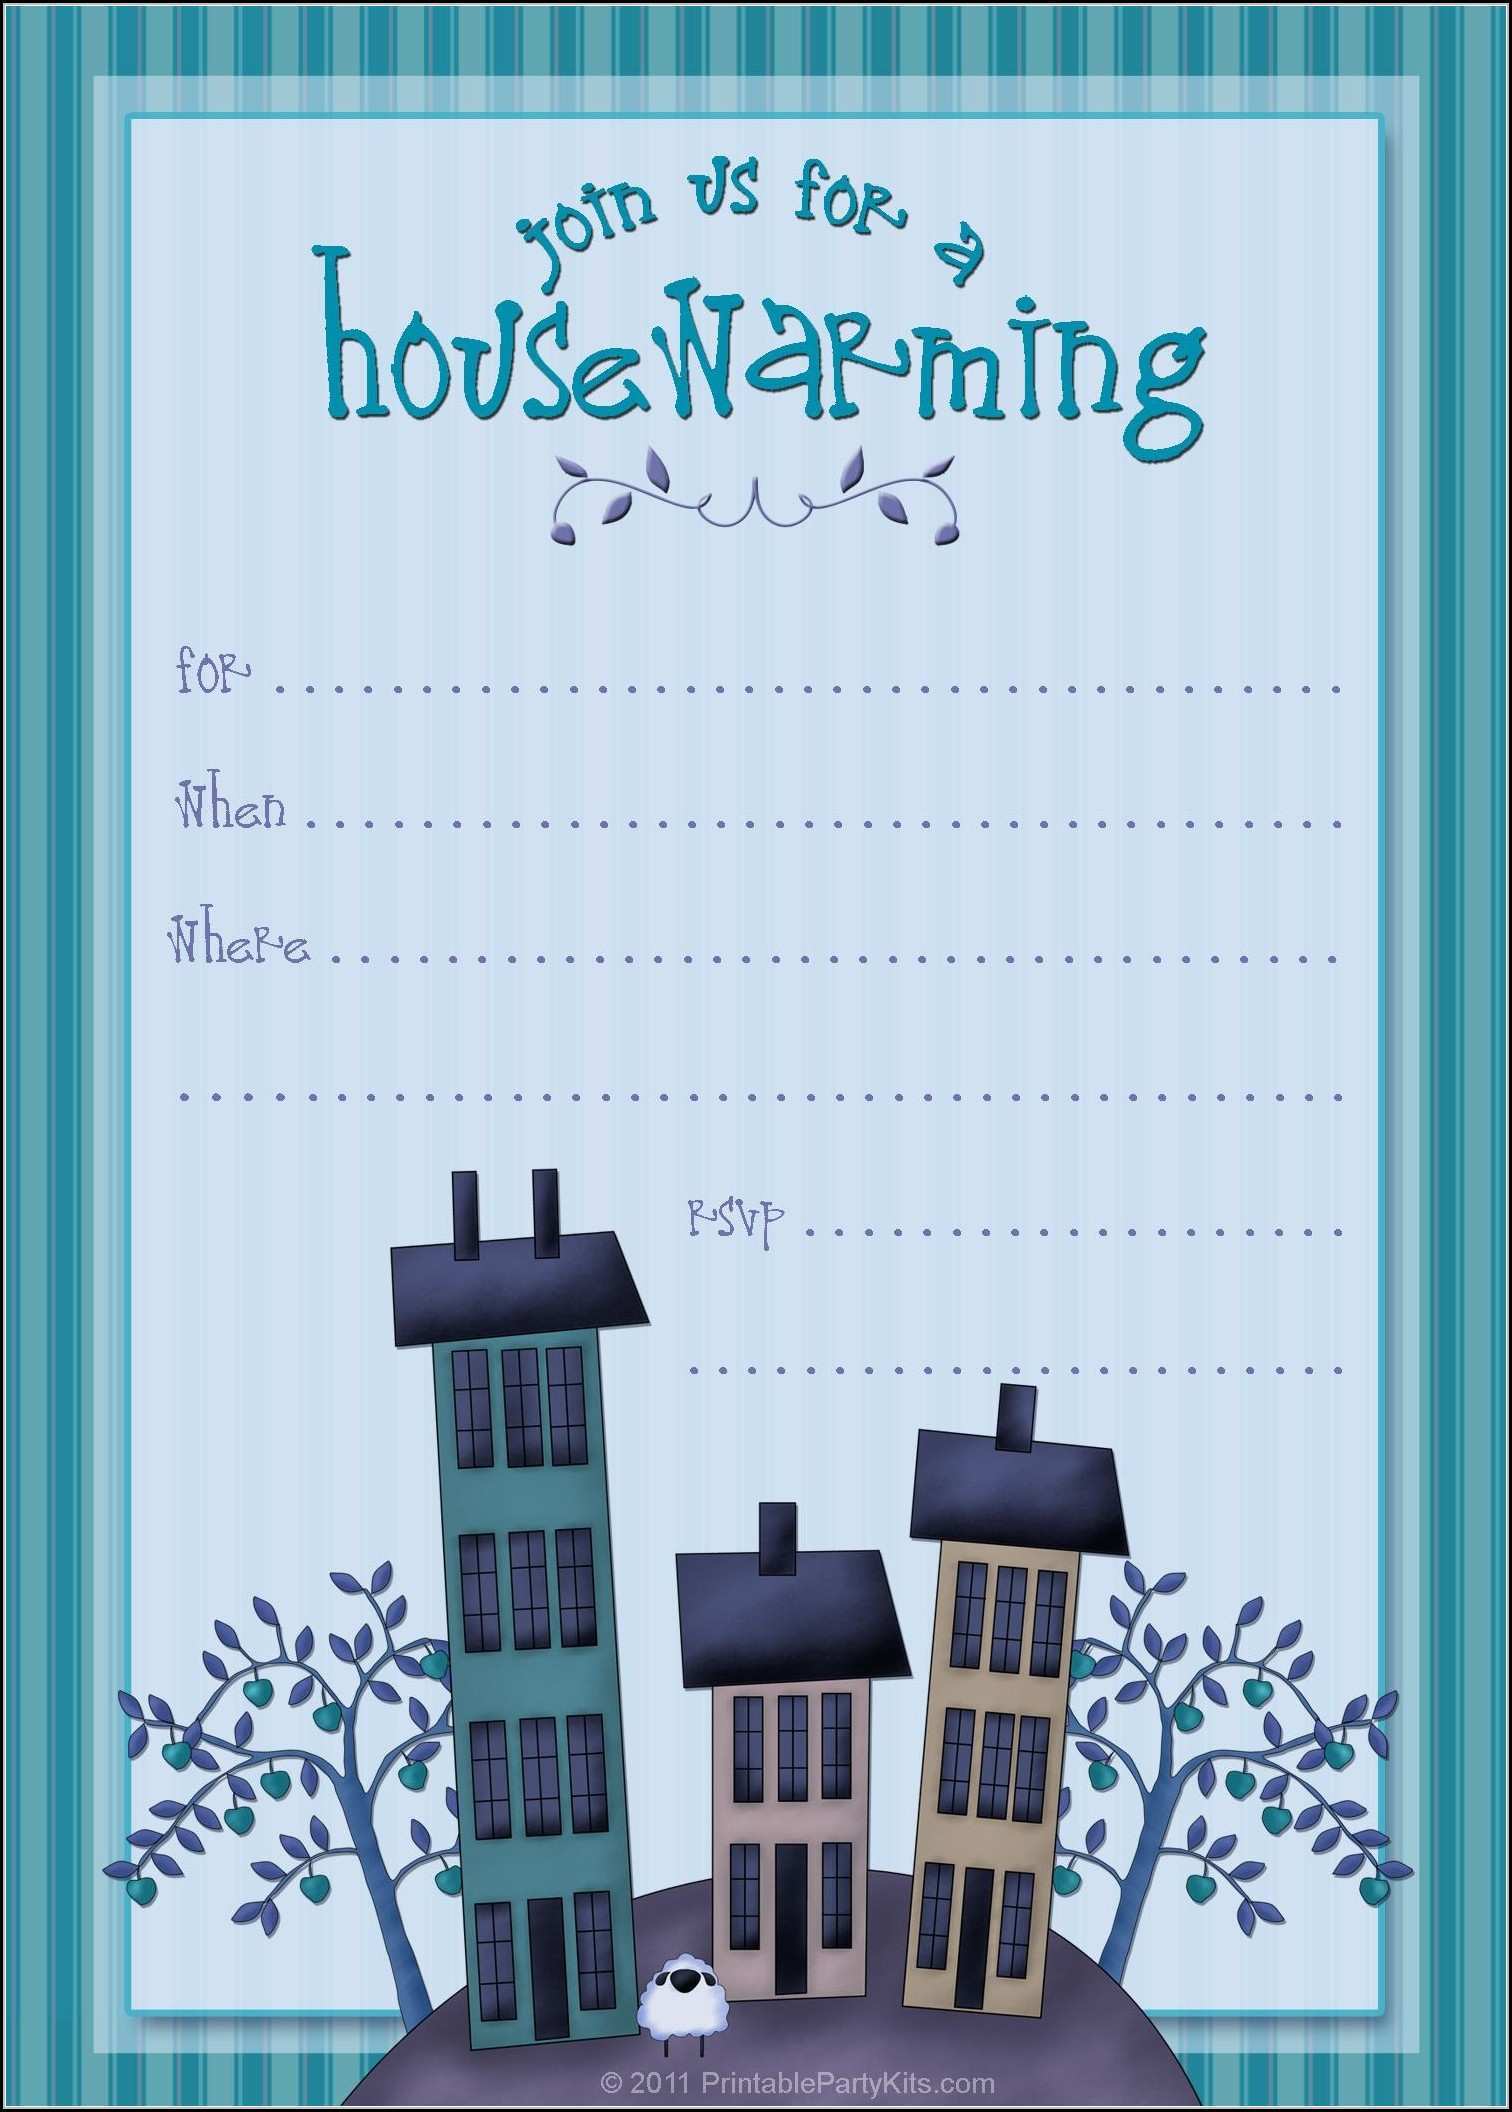 23 Report Housewarming Invitation Blank Template for Ms Word with Intended For Free Housewarming Invitation Card Template